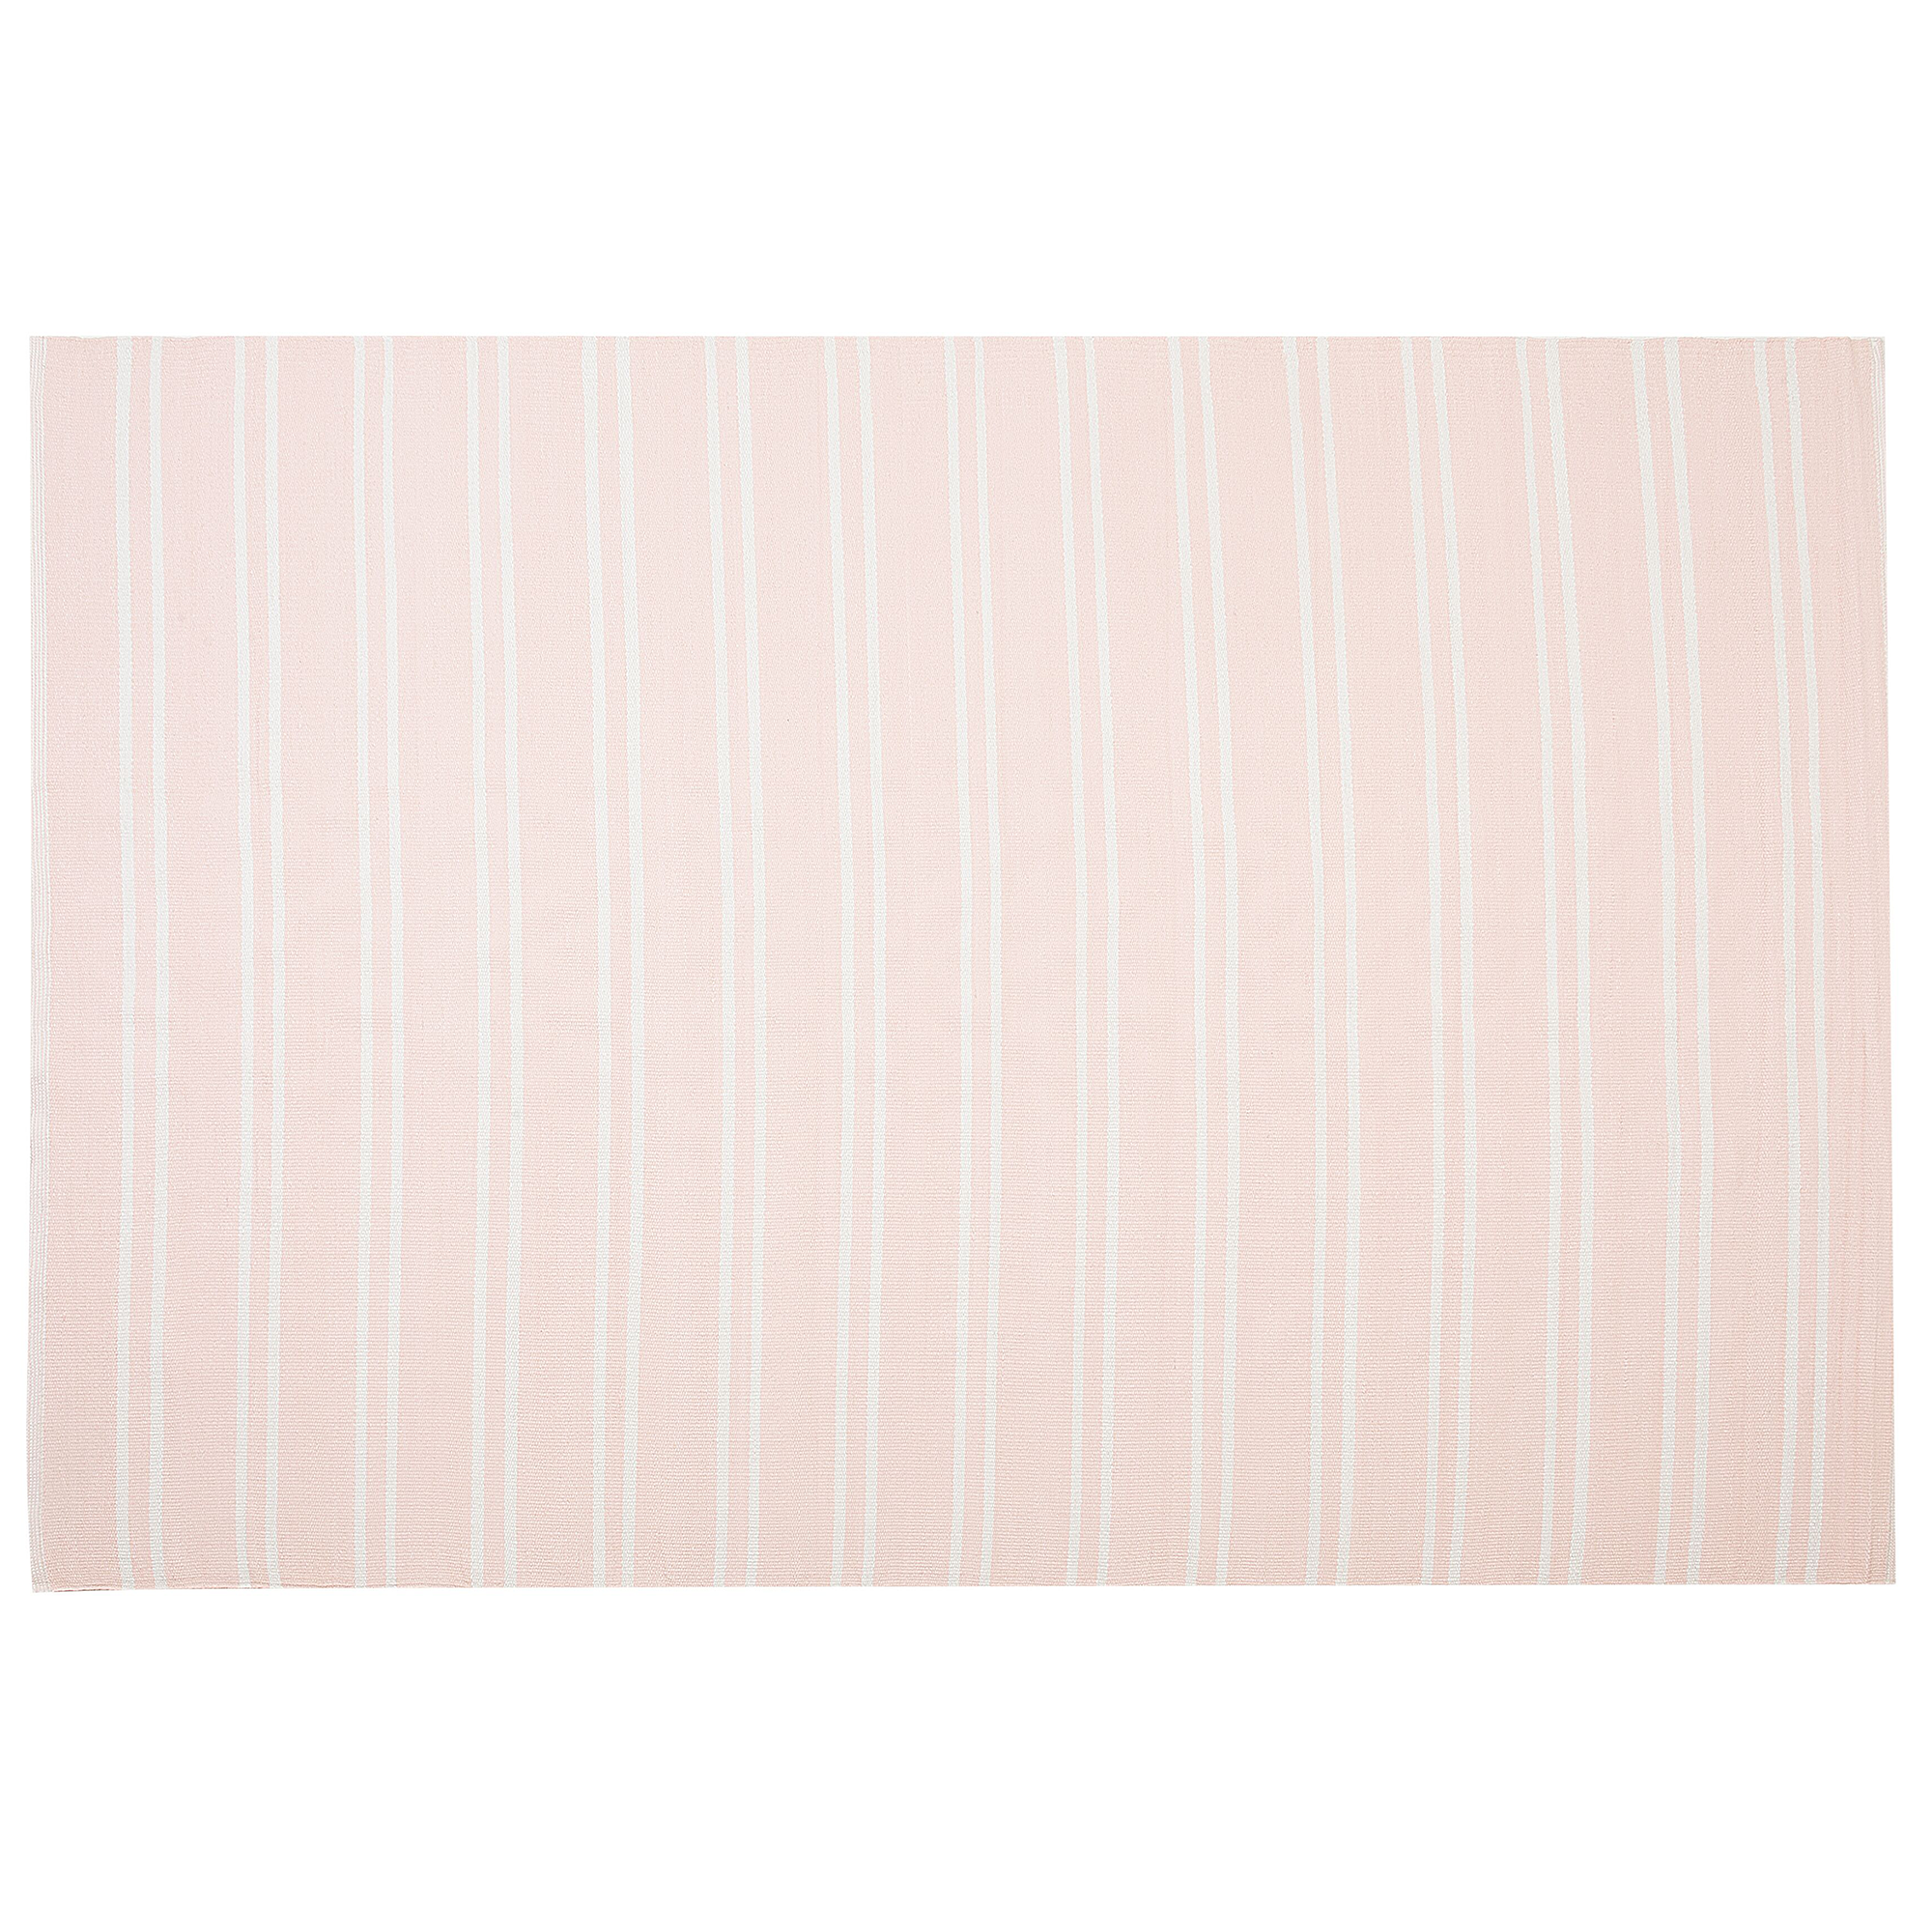 Beliani Area Rug Carpet Pink Reversible Synthetic Material Outdoor and Indoor White Stripes Rectangular 160 x 230 cm